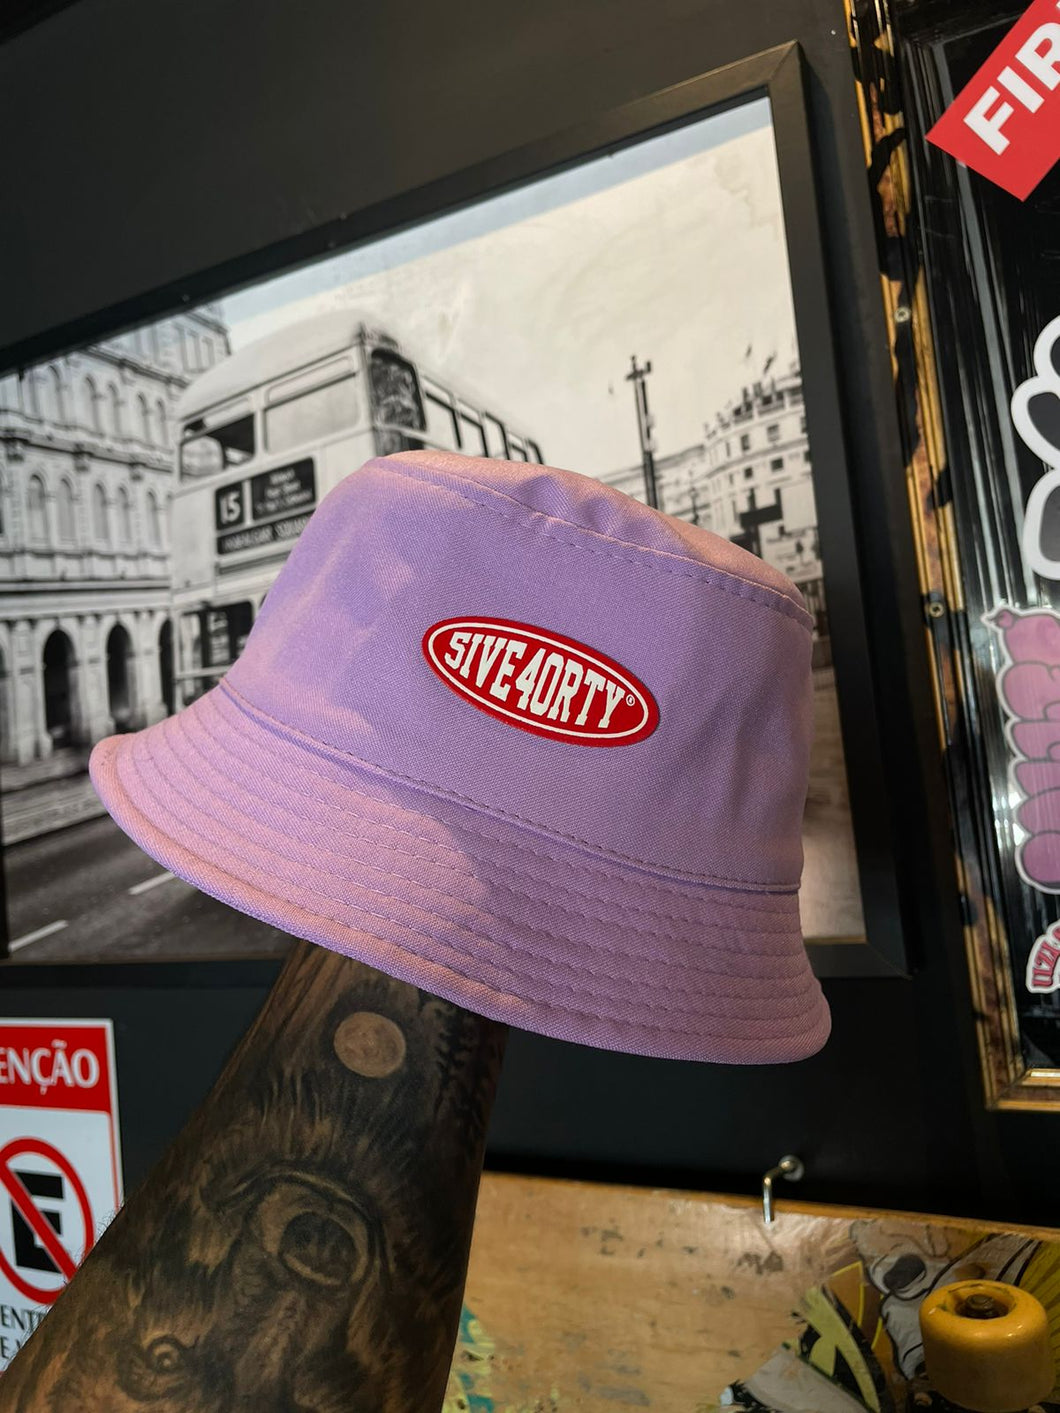 5ive4orty Bucket Hat